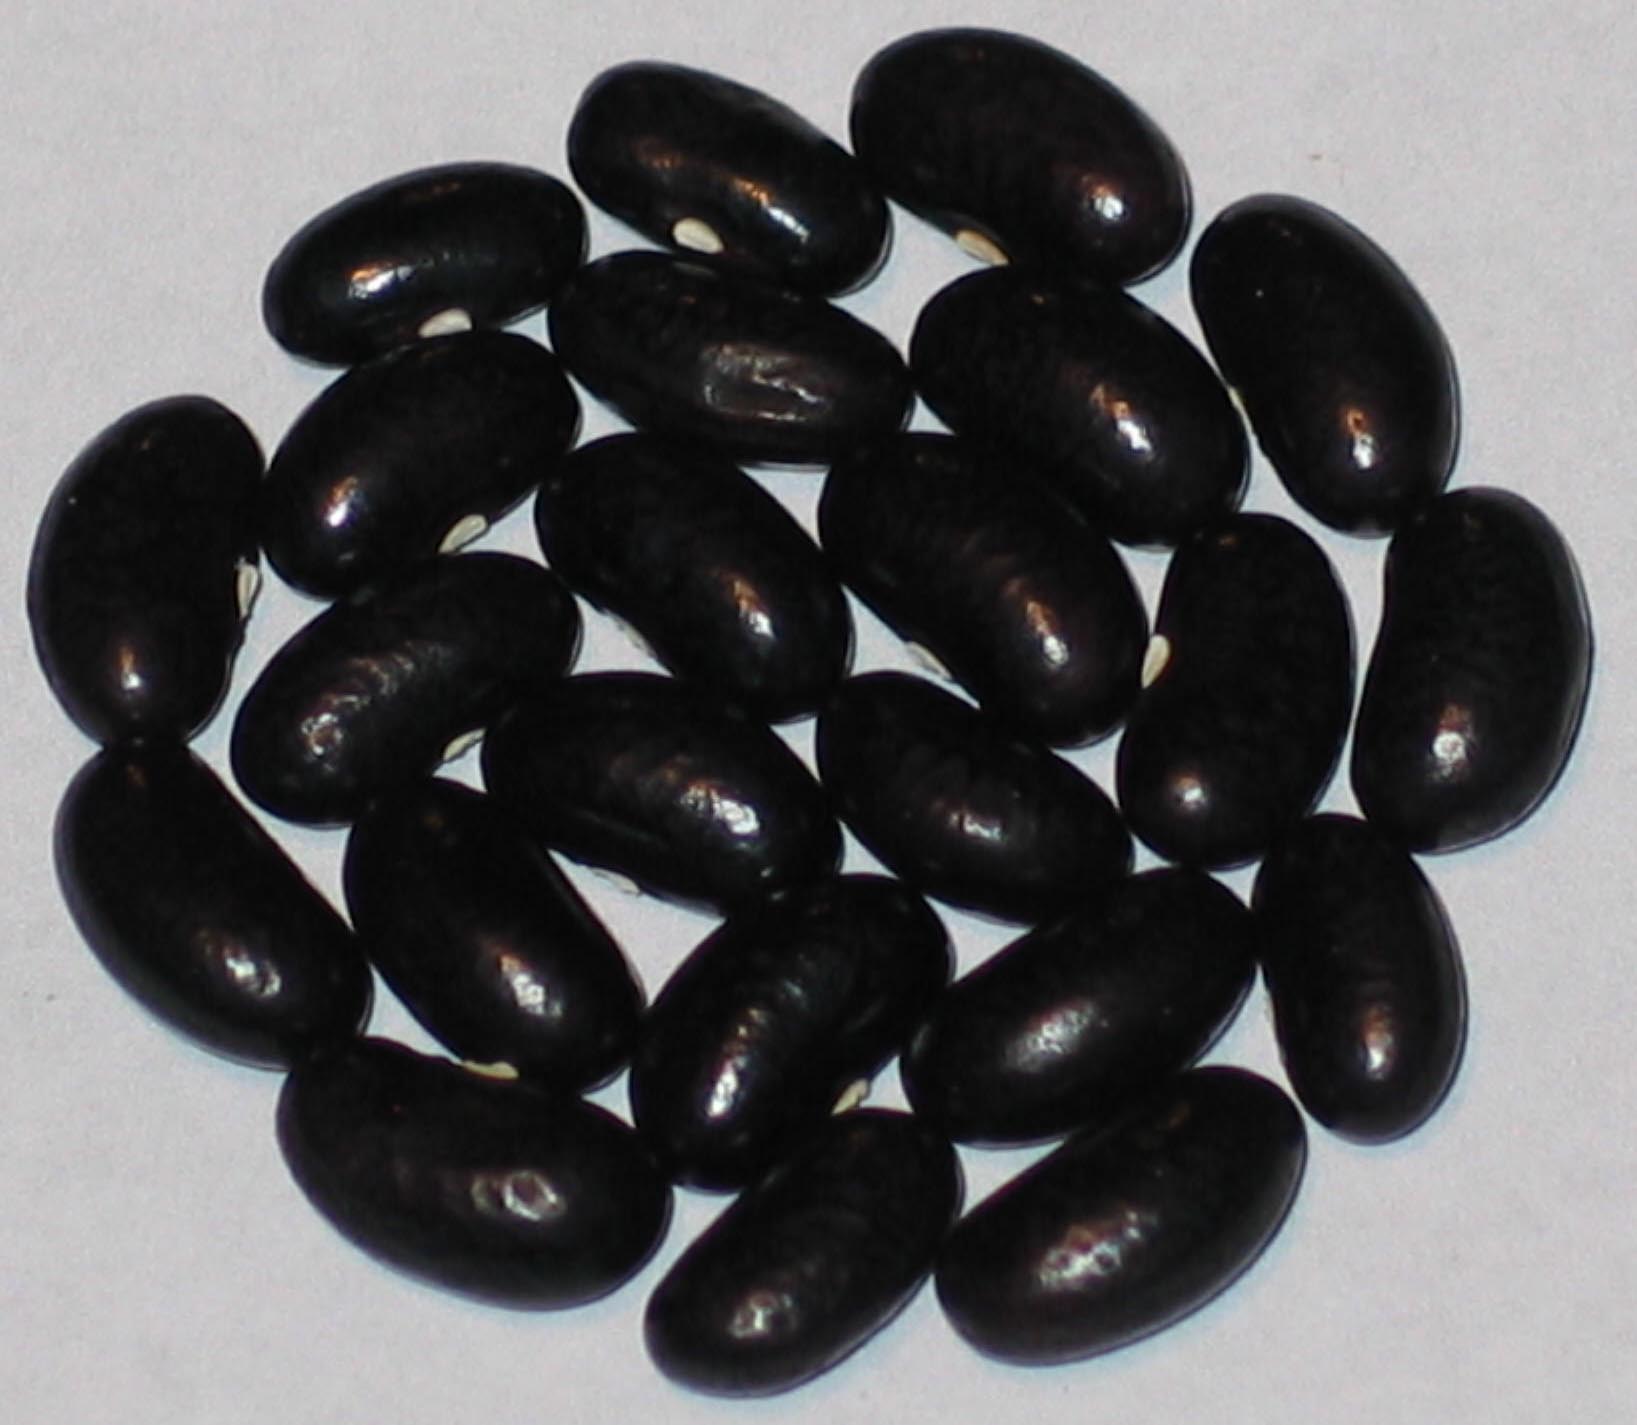 image of Syvano's beans